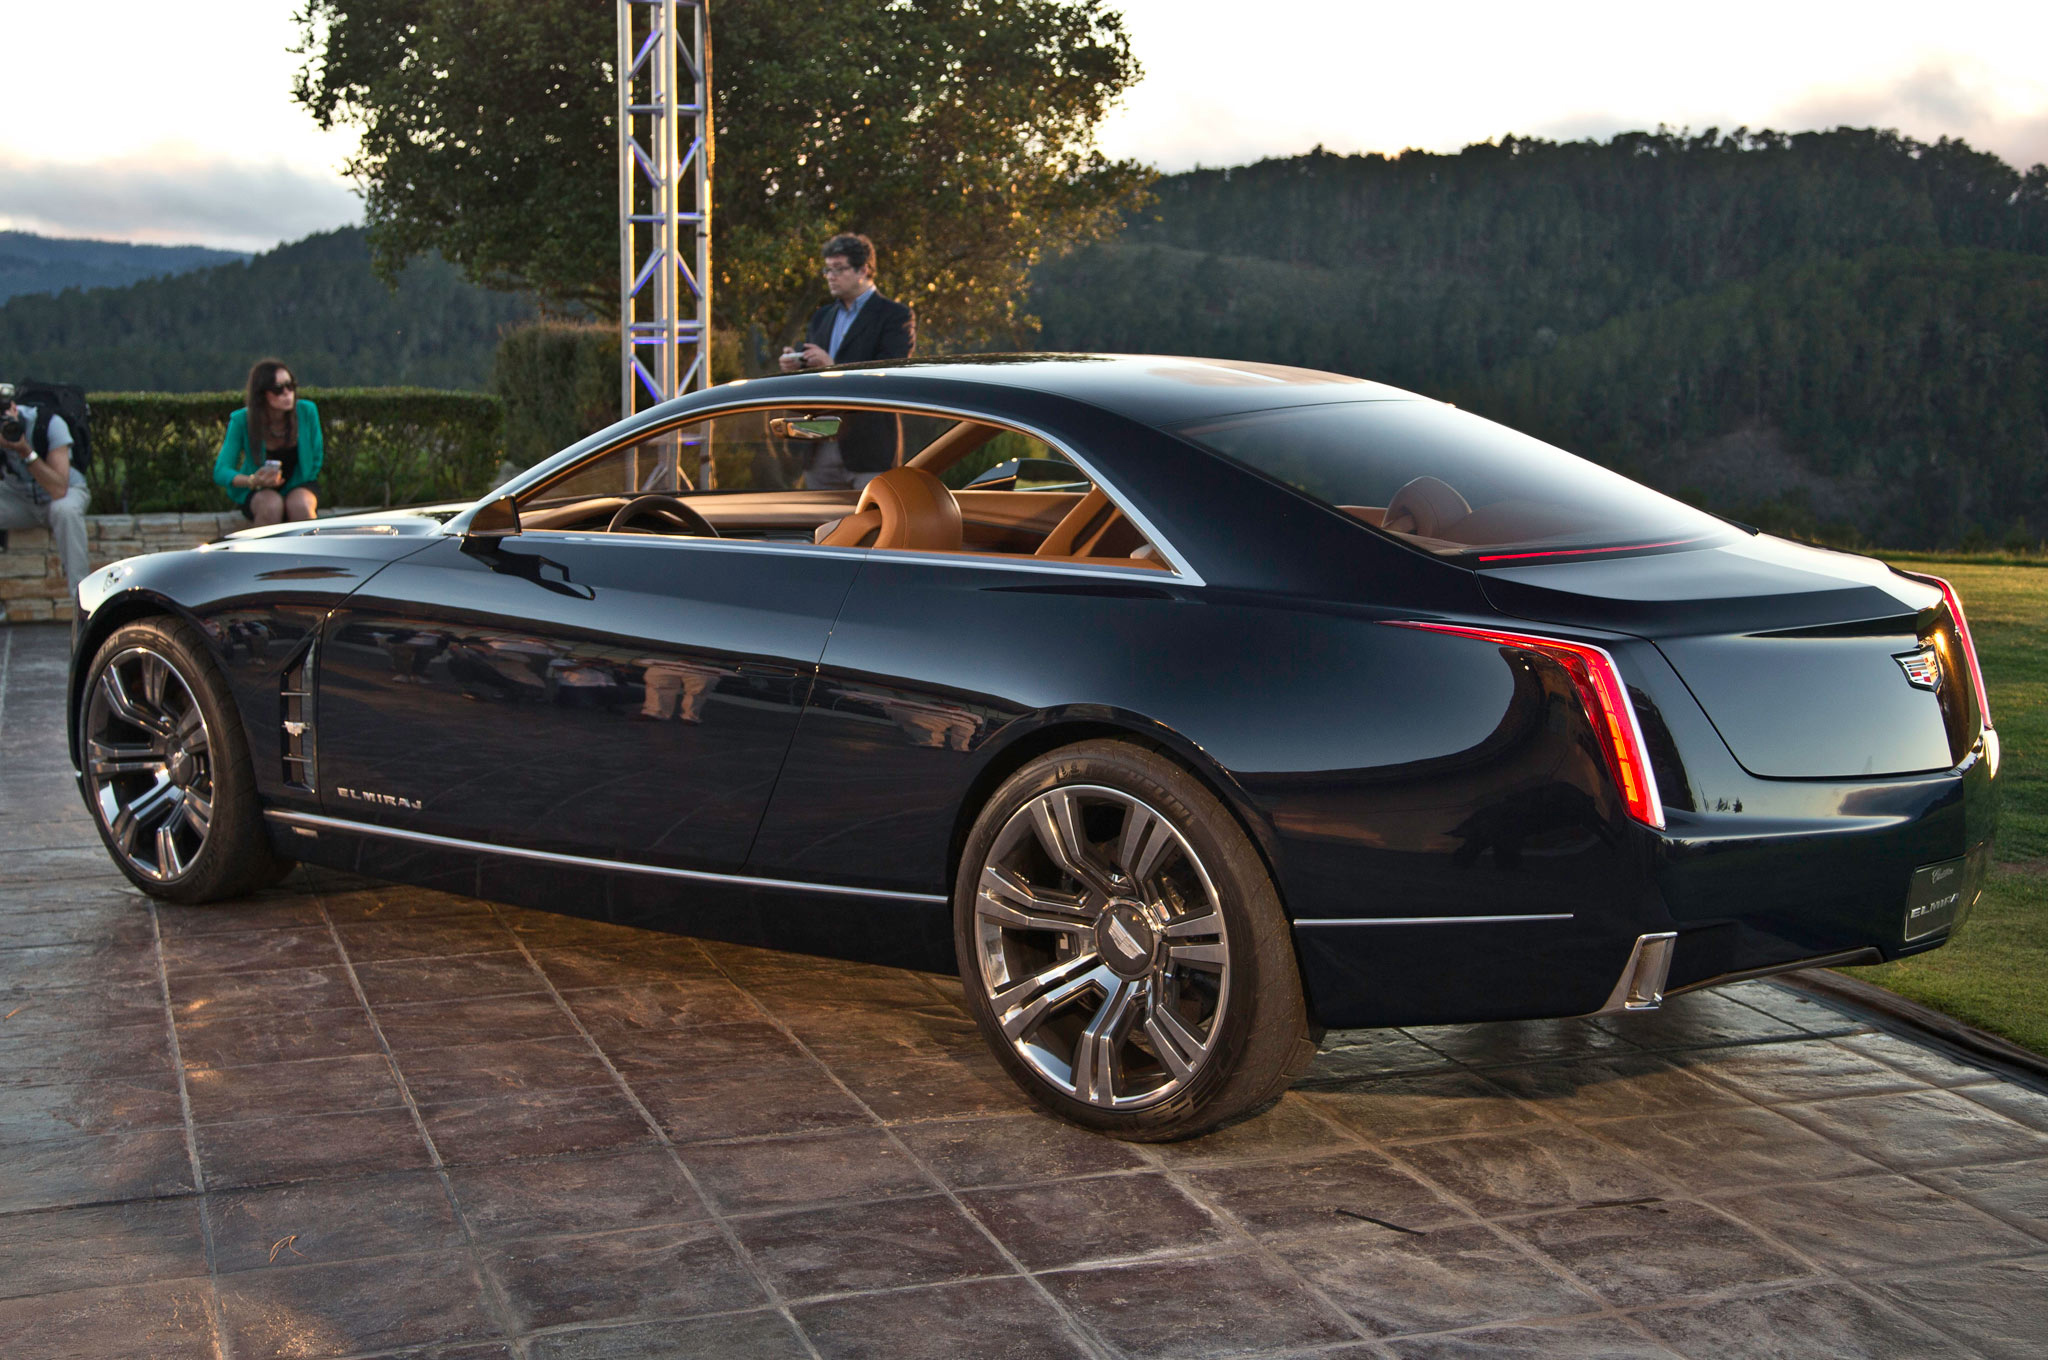 Amazing Cadillac Ciel Pictures & Backgrounds